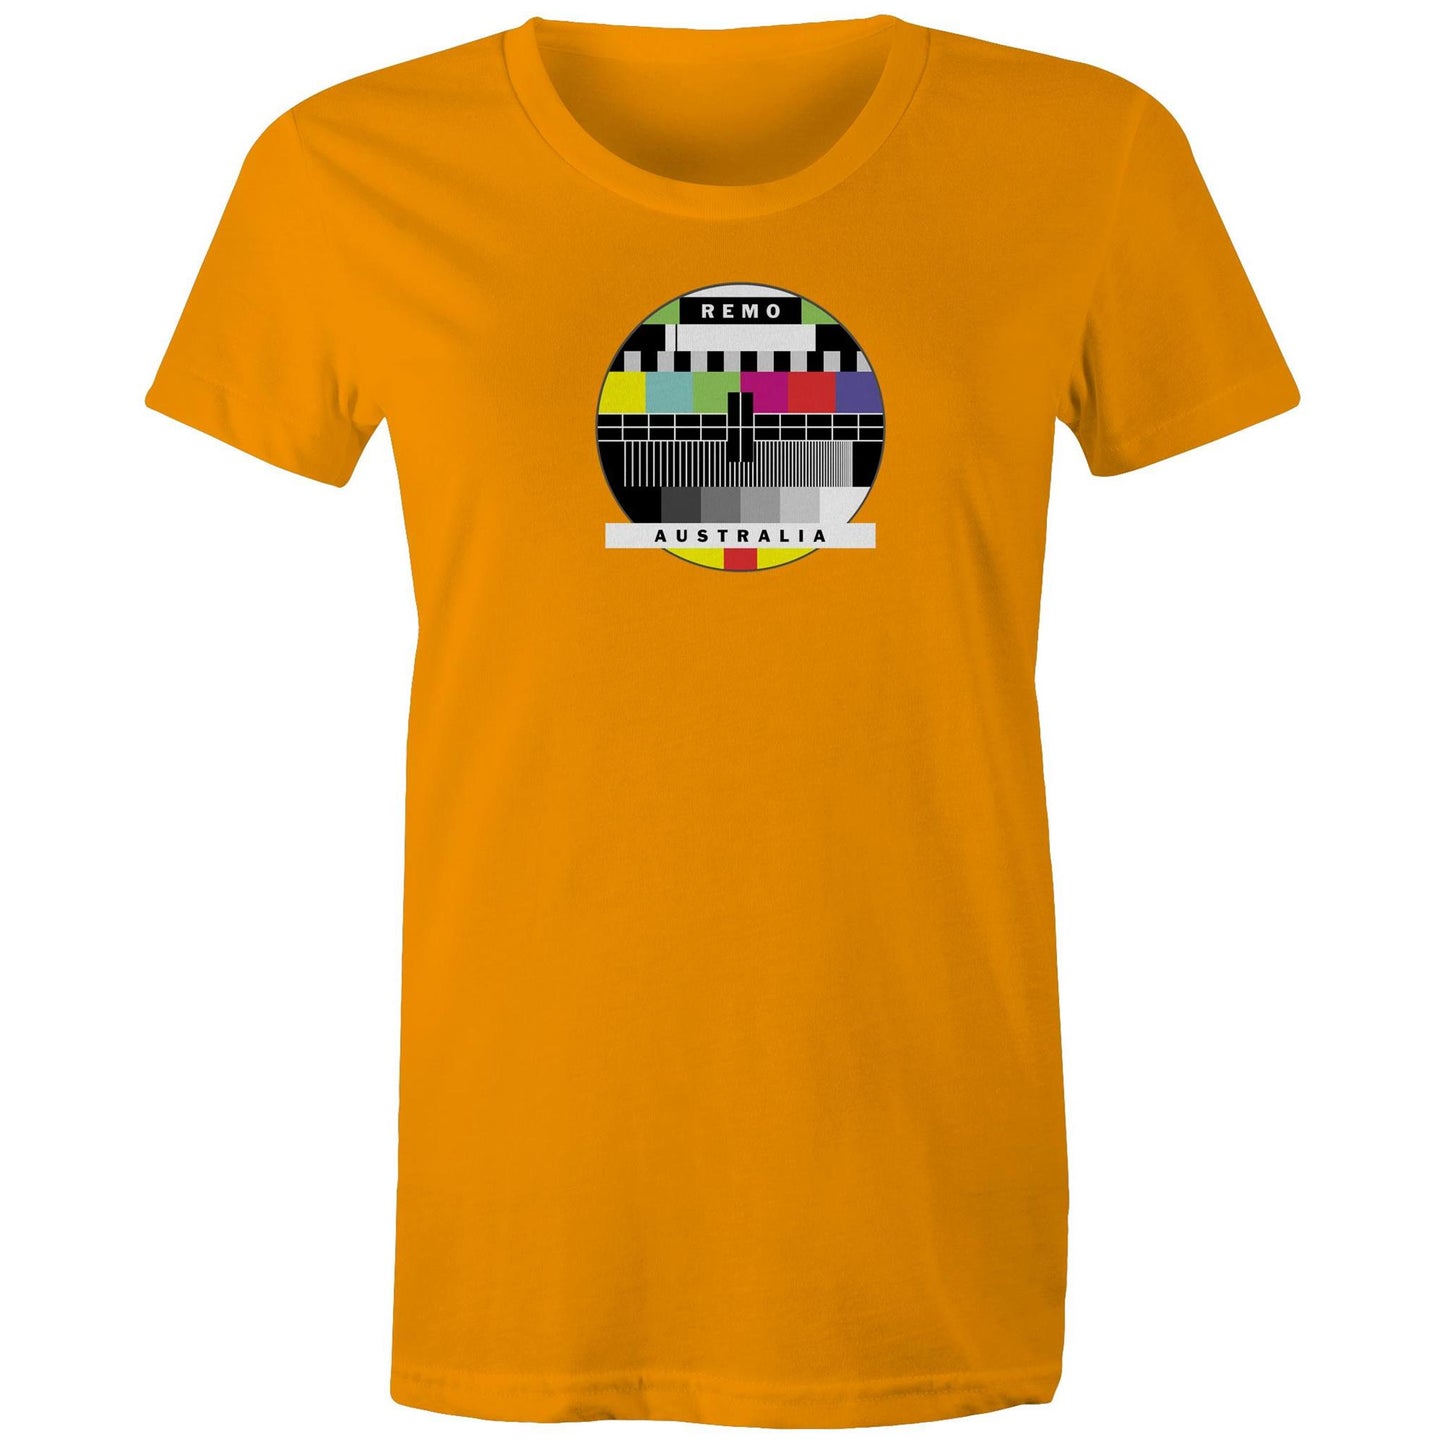 REMO TV T Shirts for Women